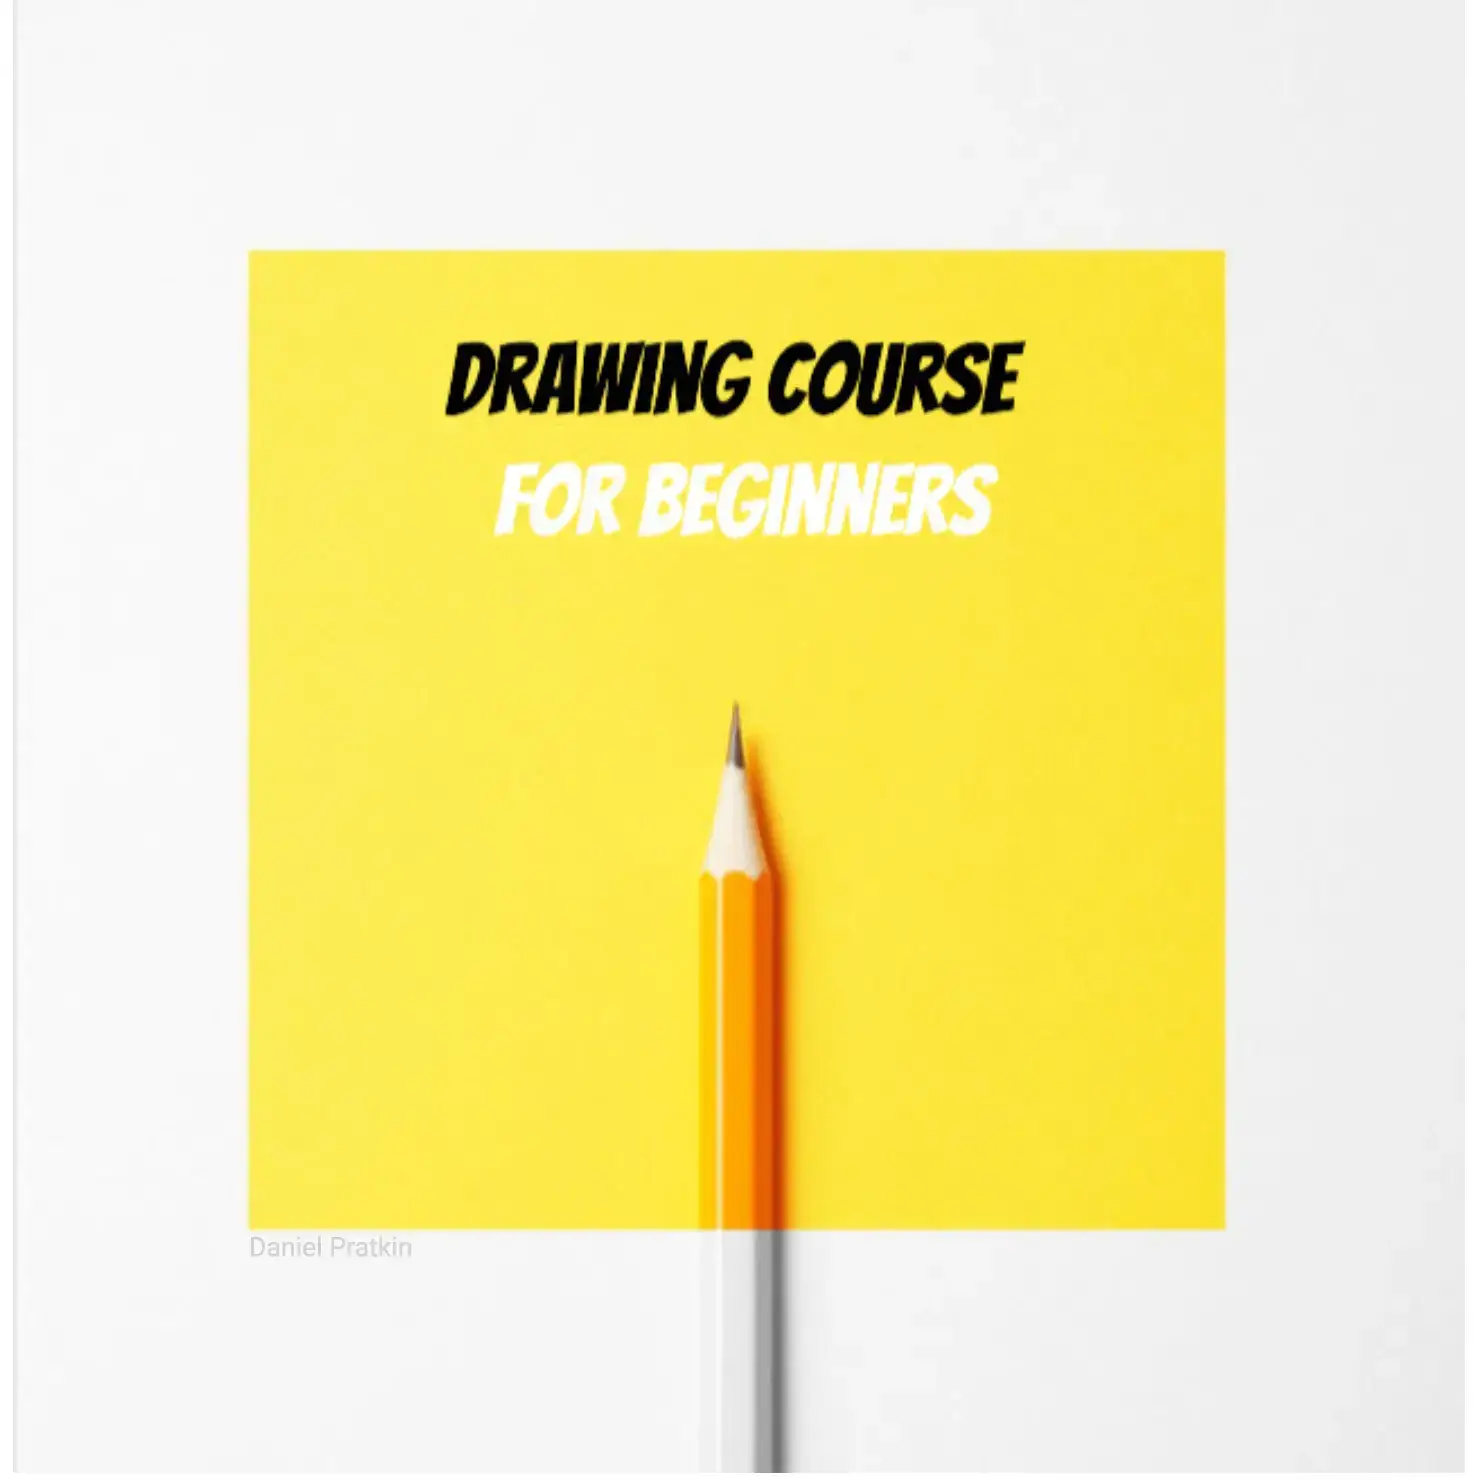 Drawing-course-for-beginners